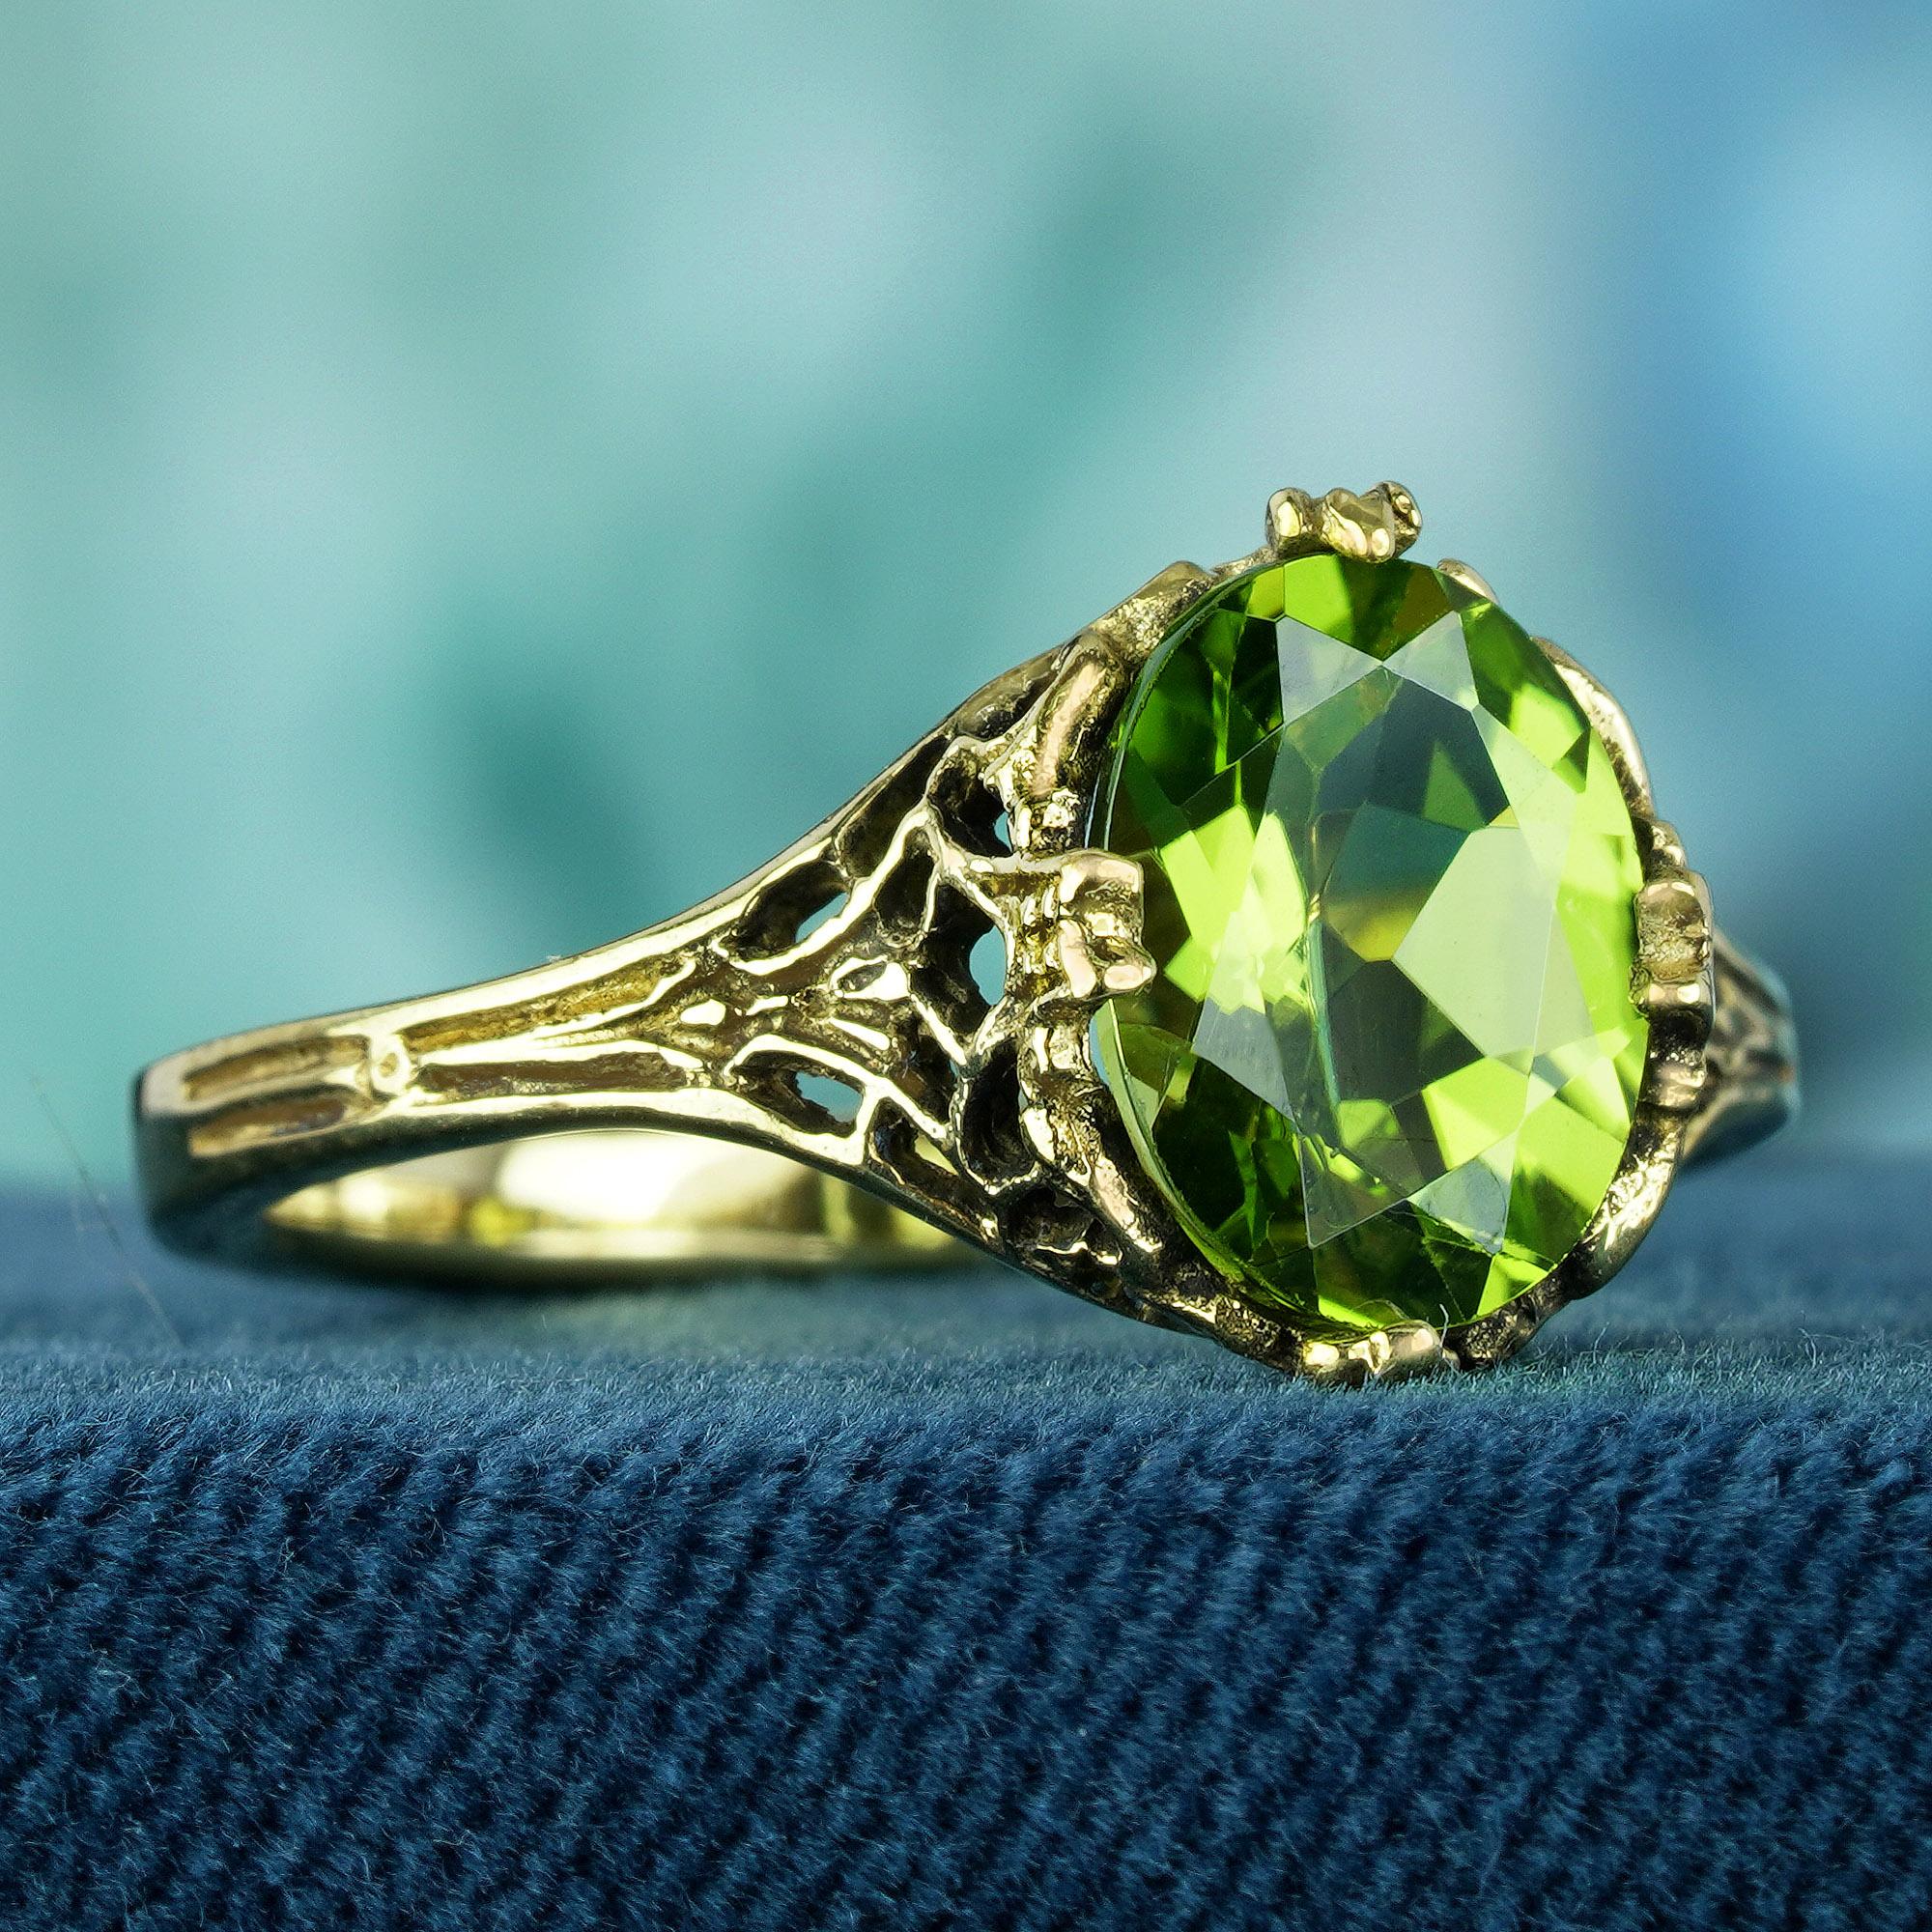 Crafted from luminous yellow gold, this ring boasts a wide band adorned with intricate filigree on the shoulders. The centerpiece of the ring is an oval lime green peridot gemstone, radiating with vibrant beauty and charm. Elevate your style whether